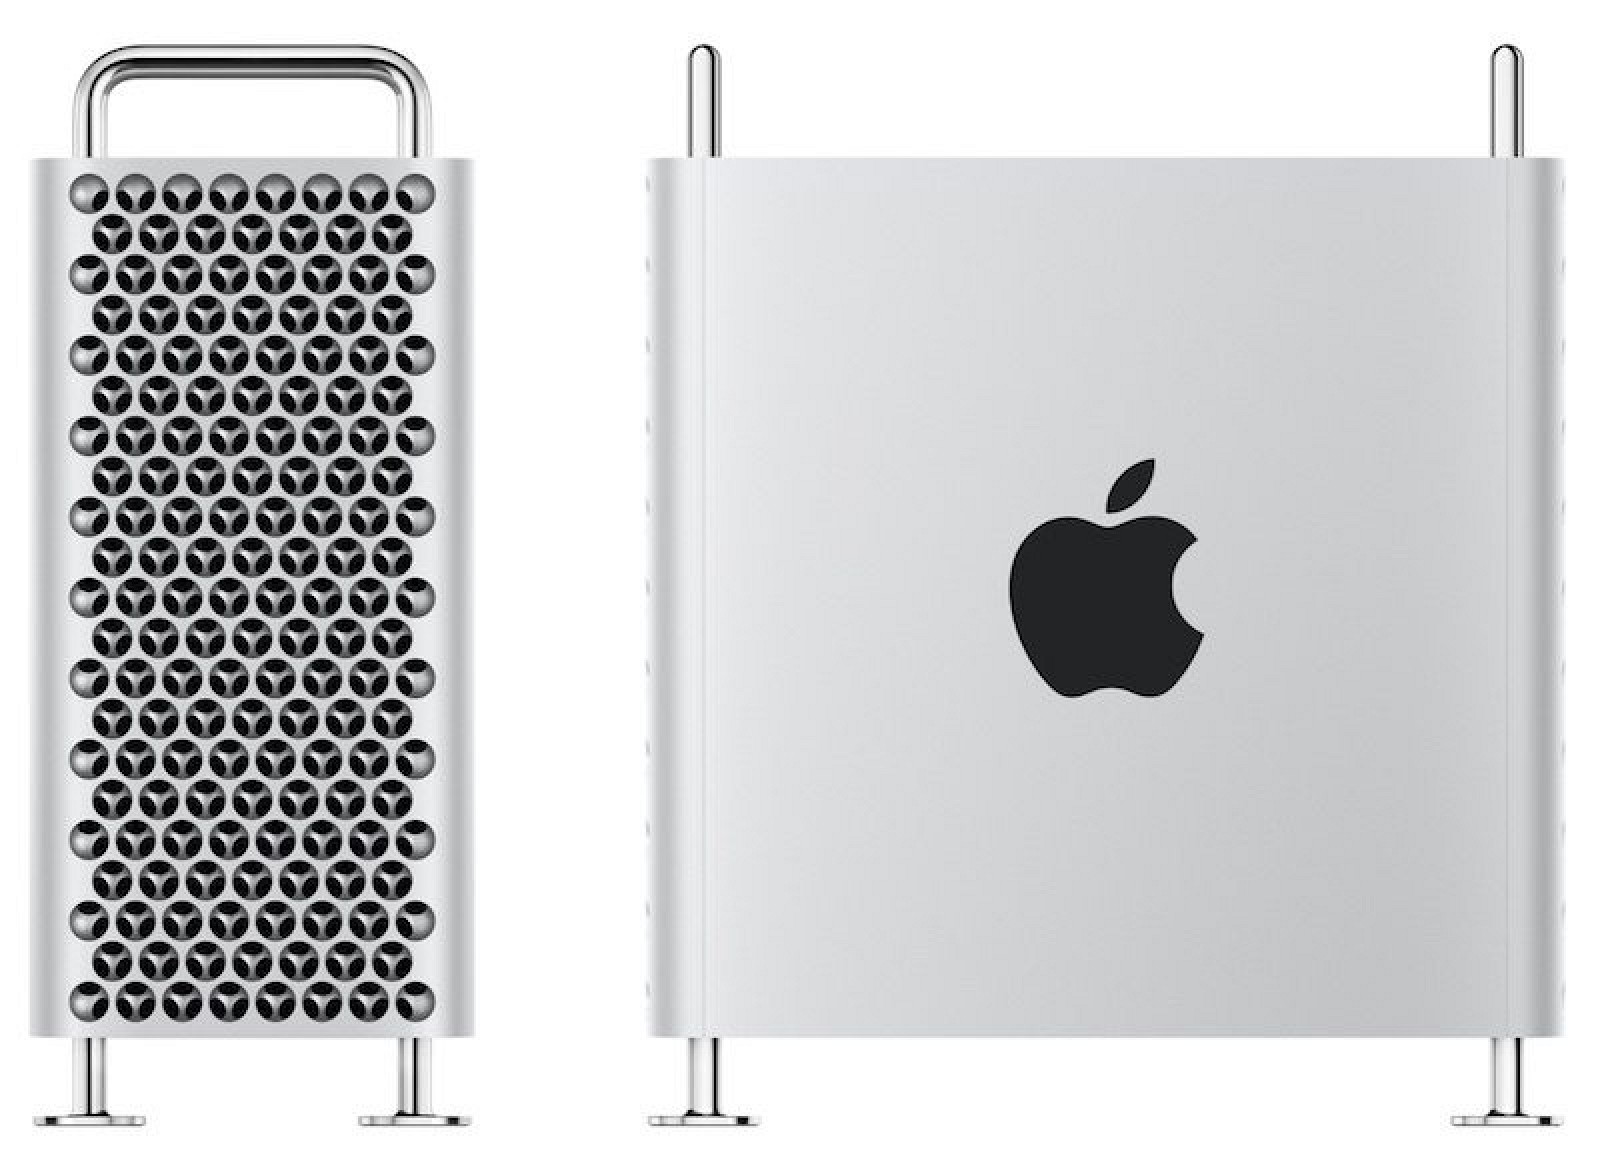 2019-mac-pro-side-and-front-800x581.jpg